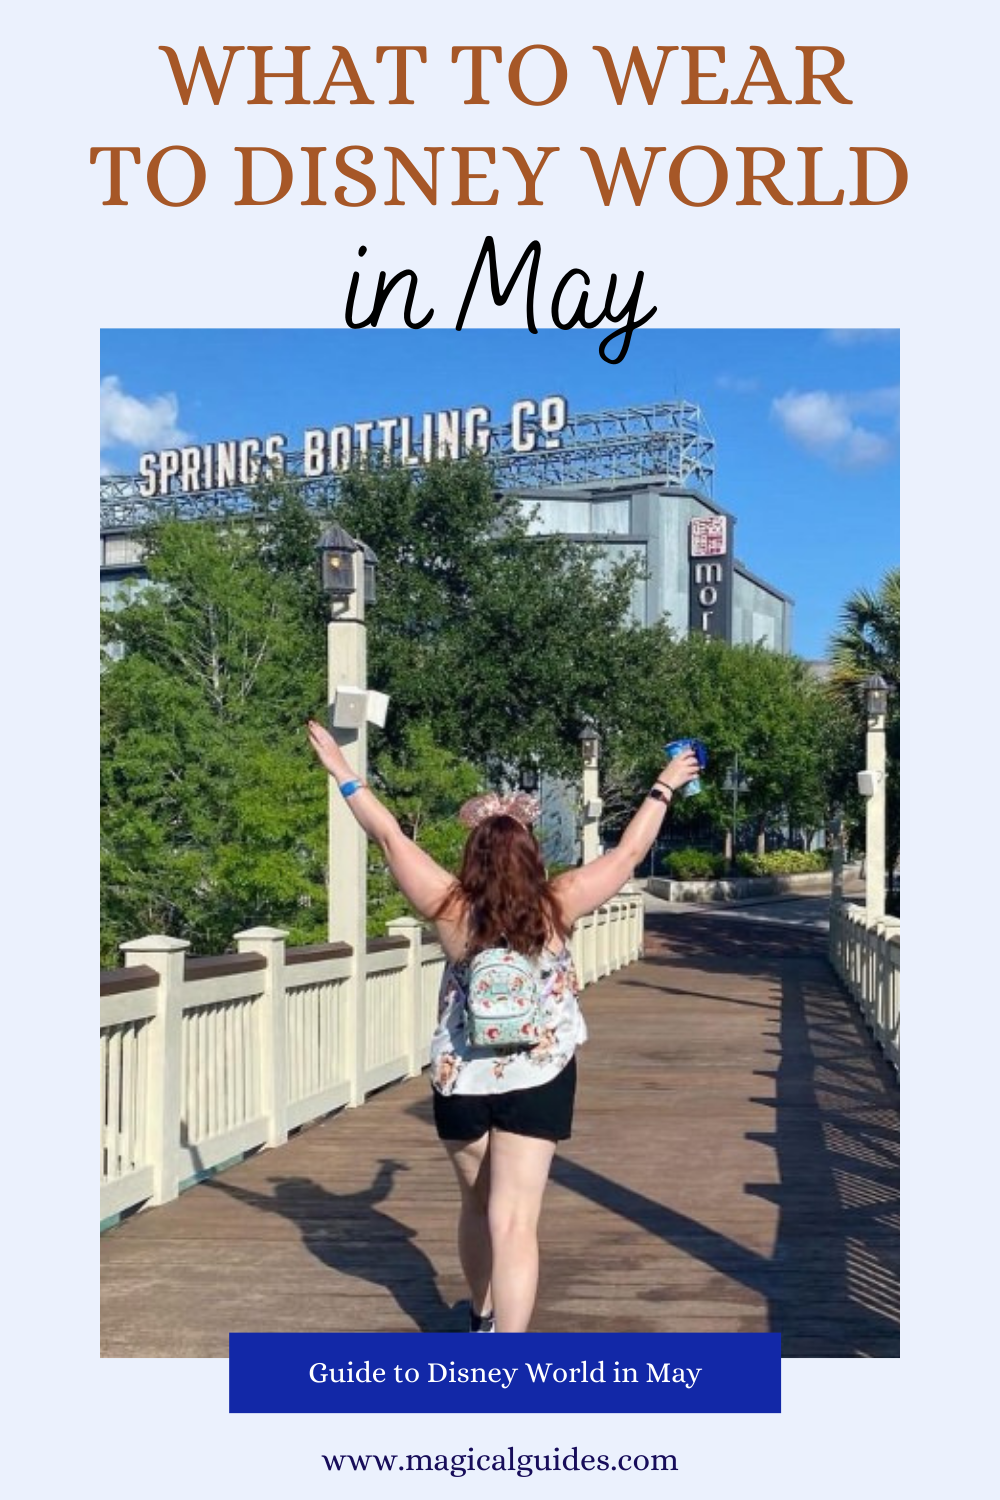 Crowd levels, weather in central Florida in May, Holidays and Special Events. What you should wear to Disney World and what you should pack for your May Disney World trip.